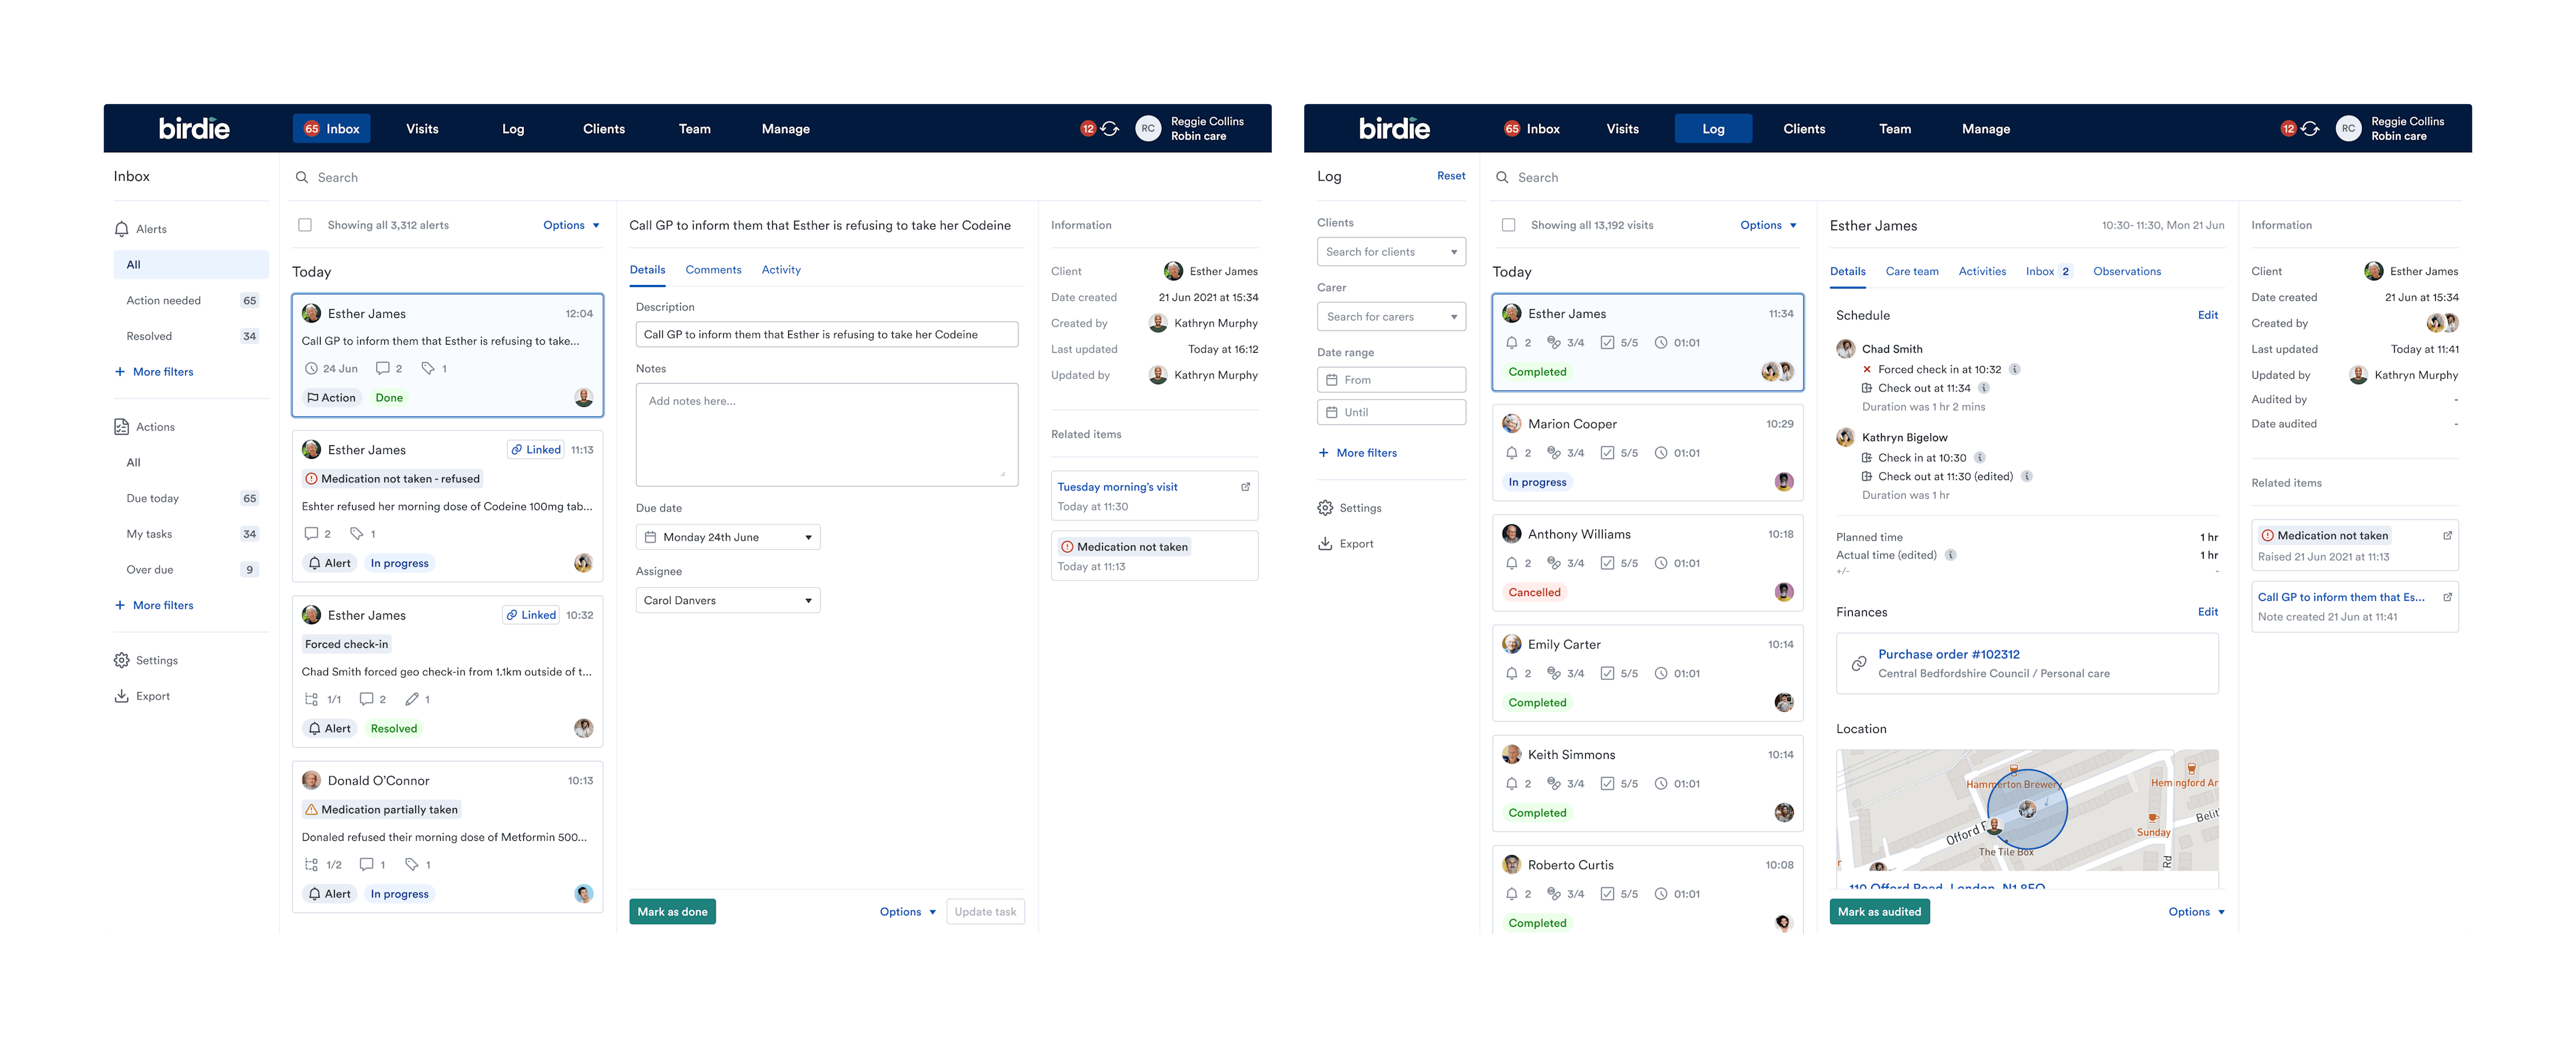 Left: Inbox, containing alerts, actions and notes raised for all clients. Right: Log, containing visit reports for all clients.